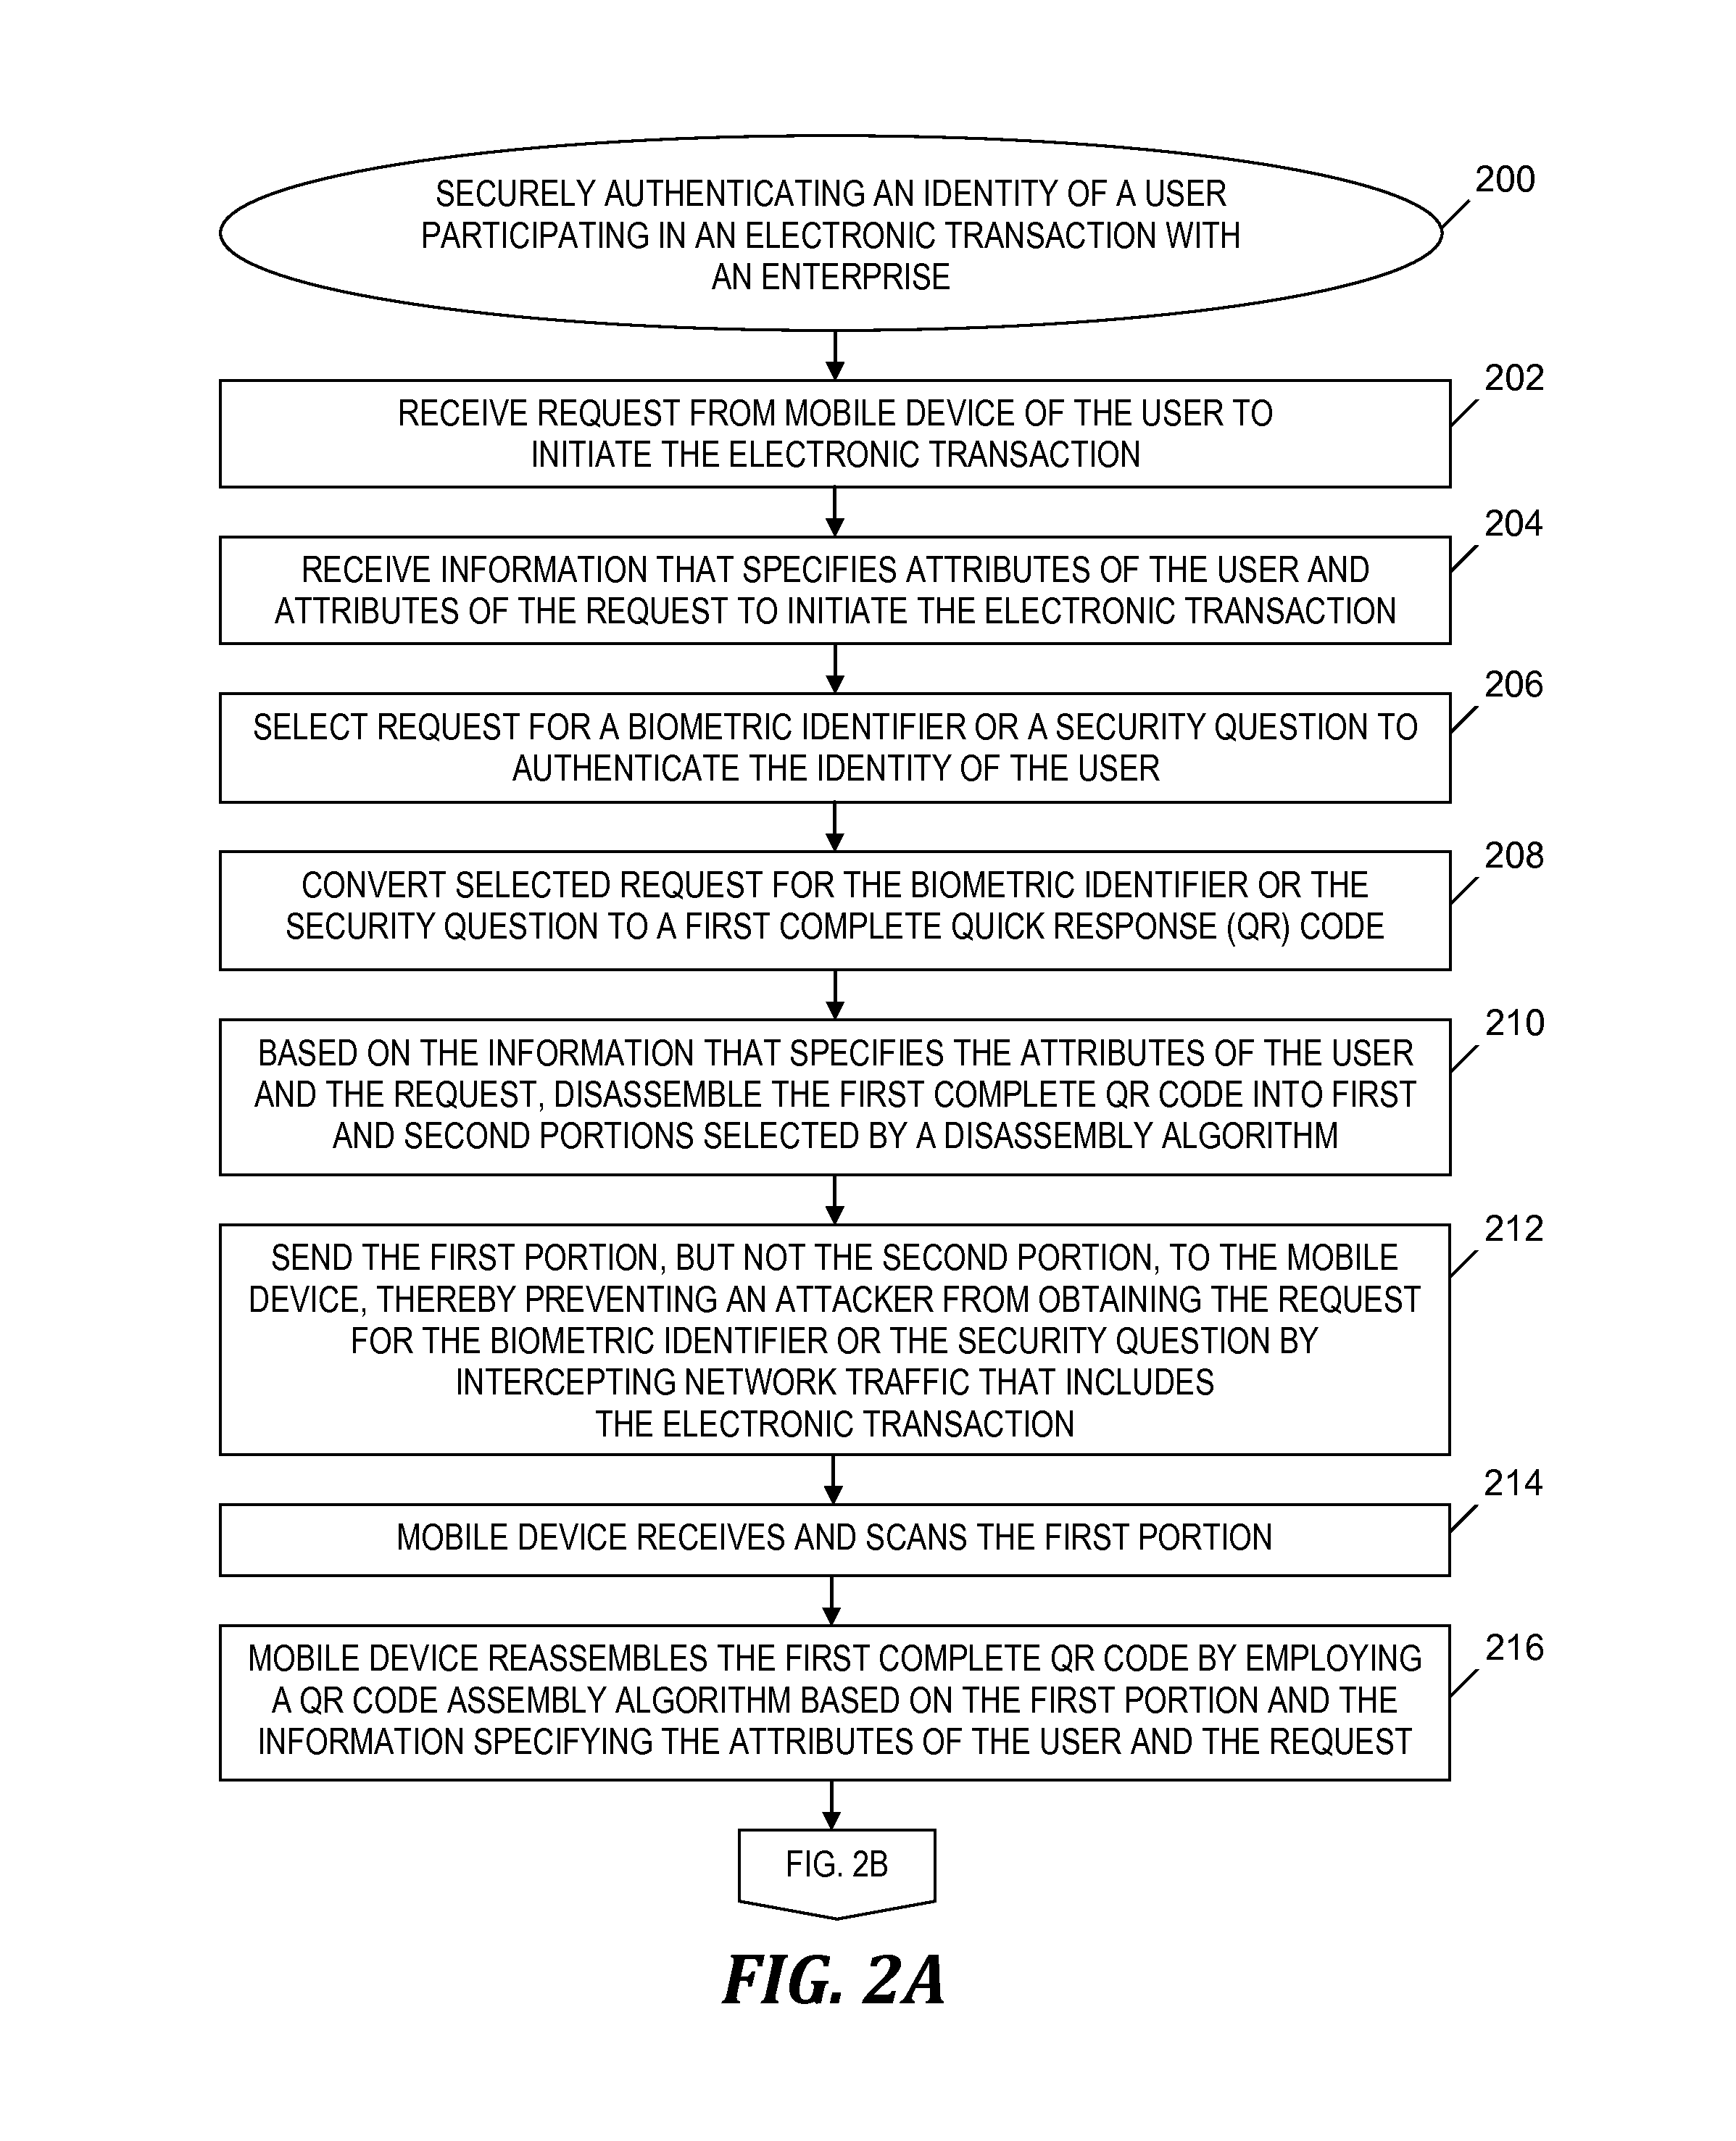 Secure identity authentication in an electronic transaction